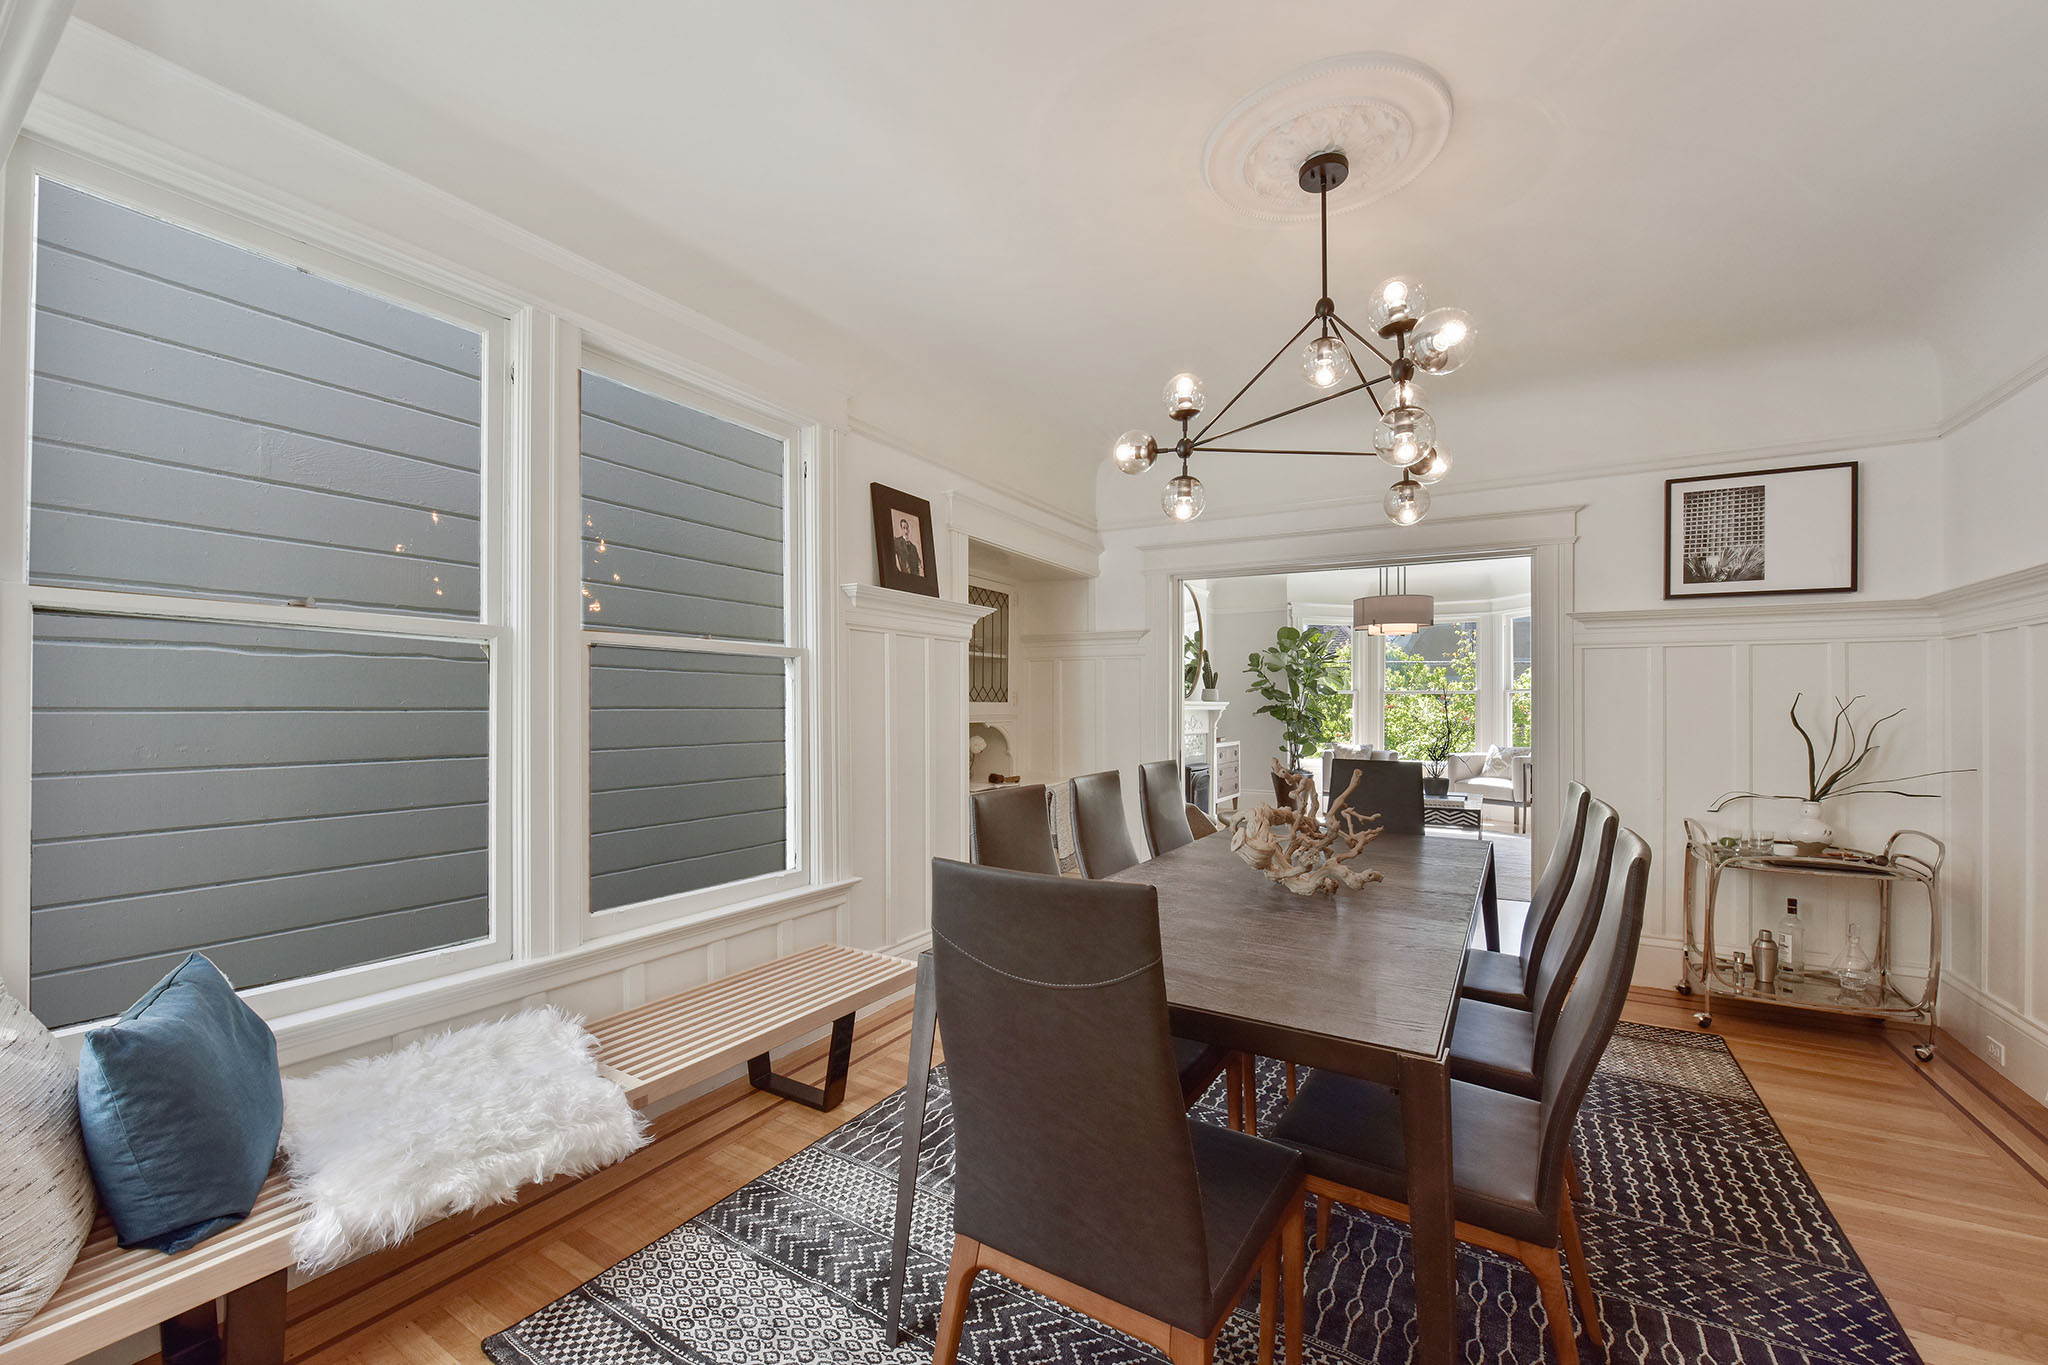 Property Photo: Dining room, featuring wood floors and large windows